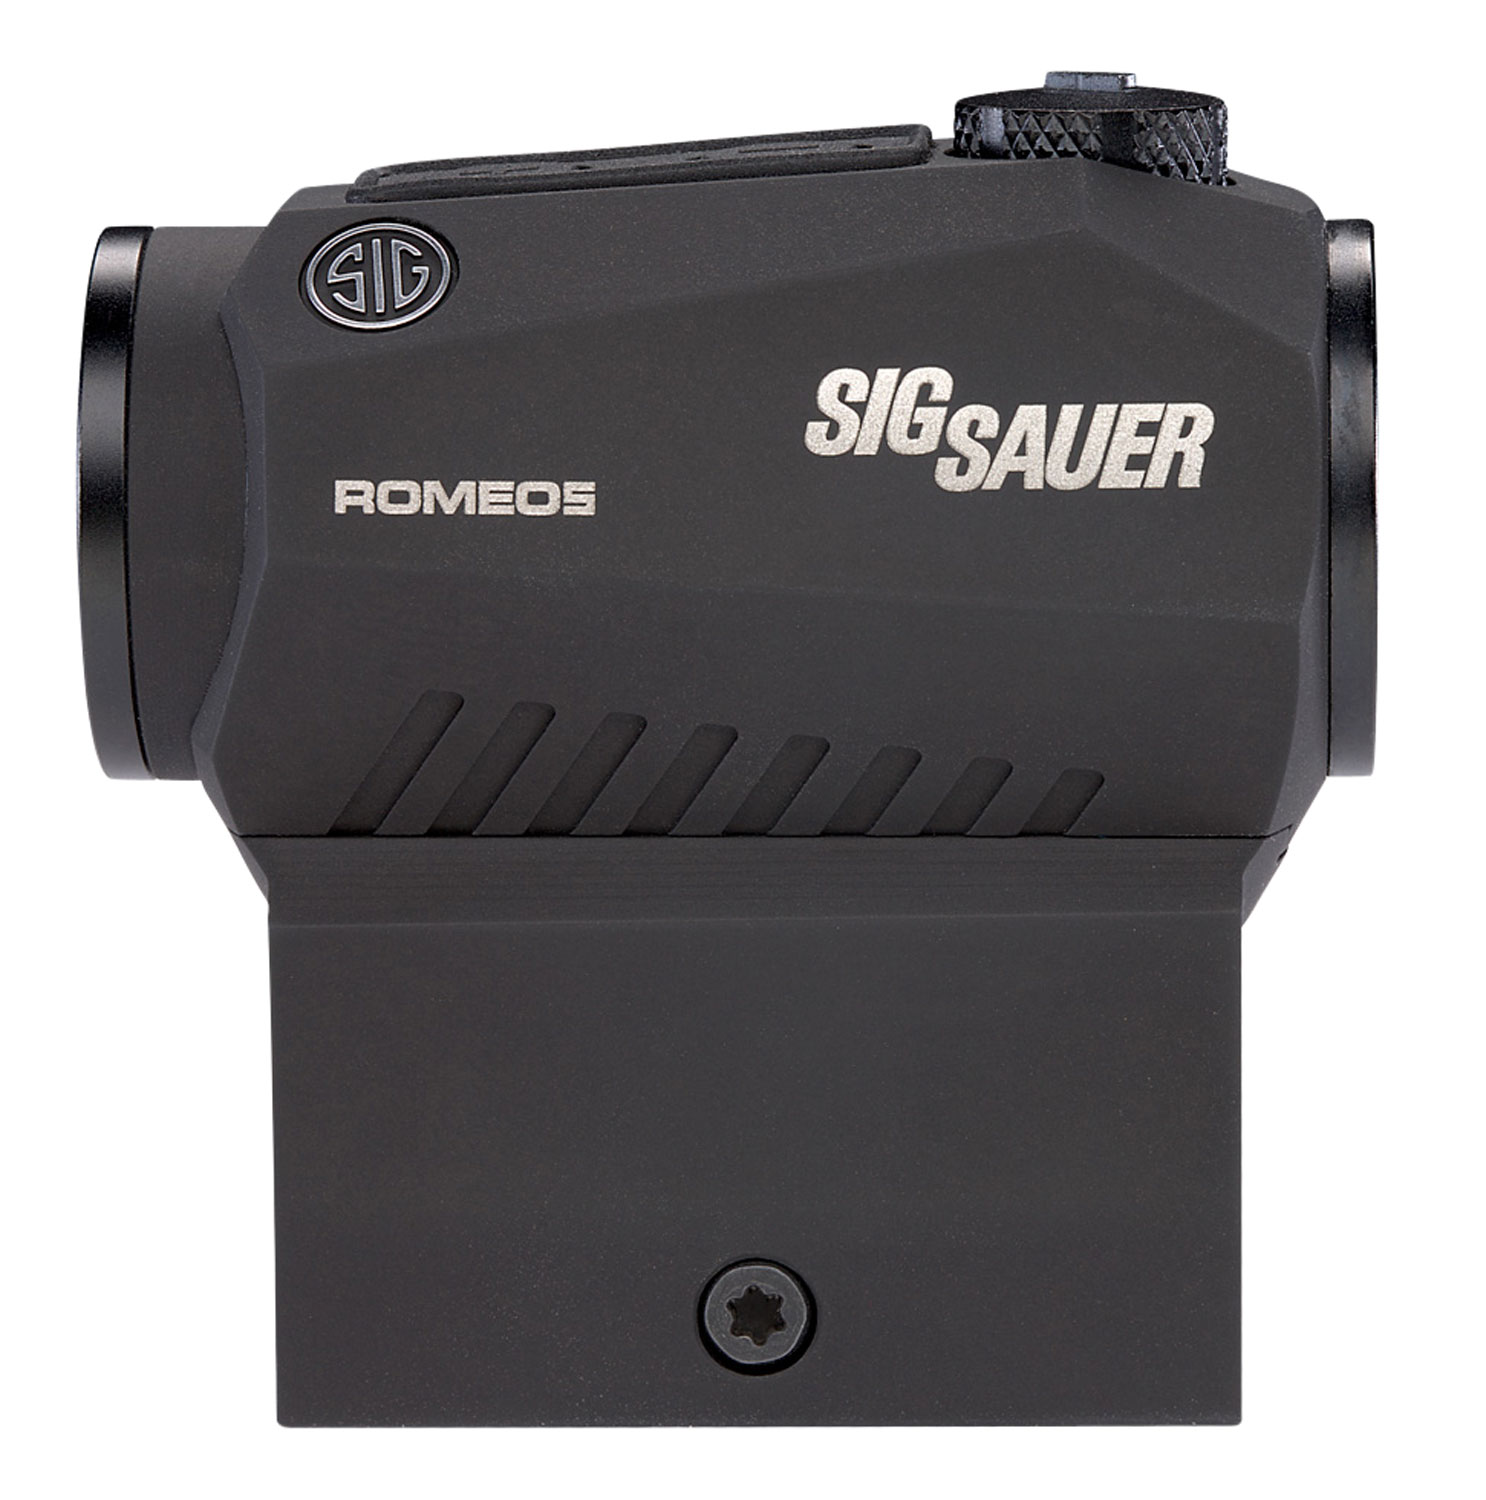 Sig Sauer SOR52001 Romeo5 Compact Red Dot Sight 1x20mm 2 MOA Red Dot